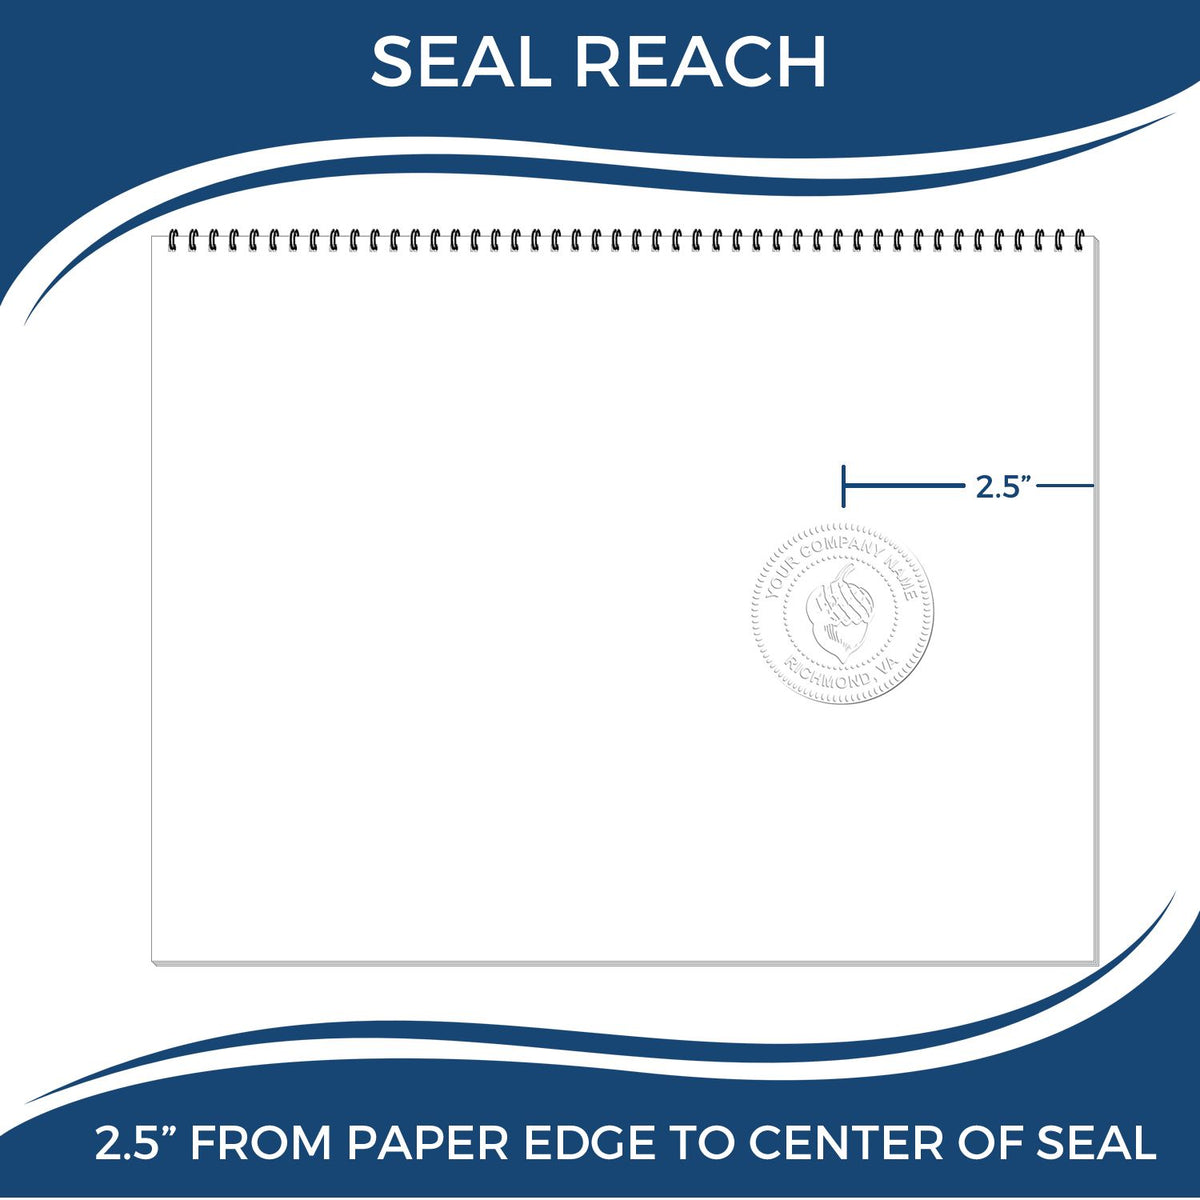 An infographic showing the seal reach which is represented by a ruler and a miniature seal image of the Heavy Duty Cast Iron Minnesota Architect Embosser